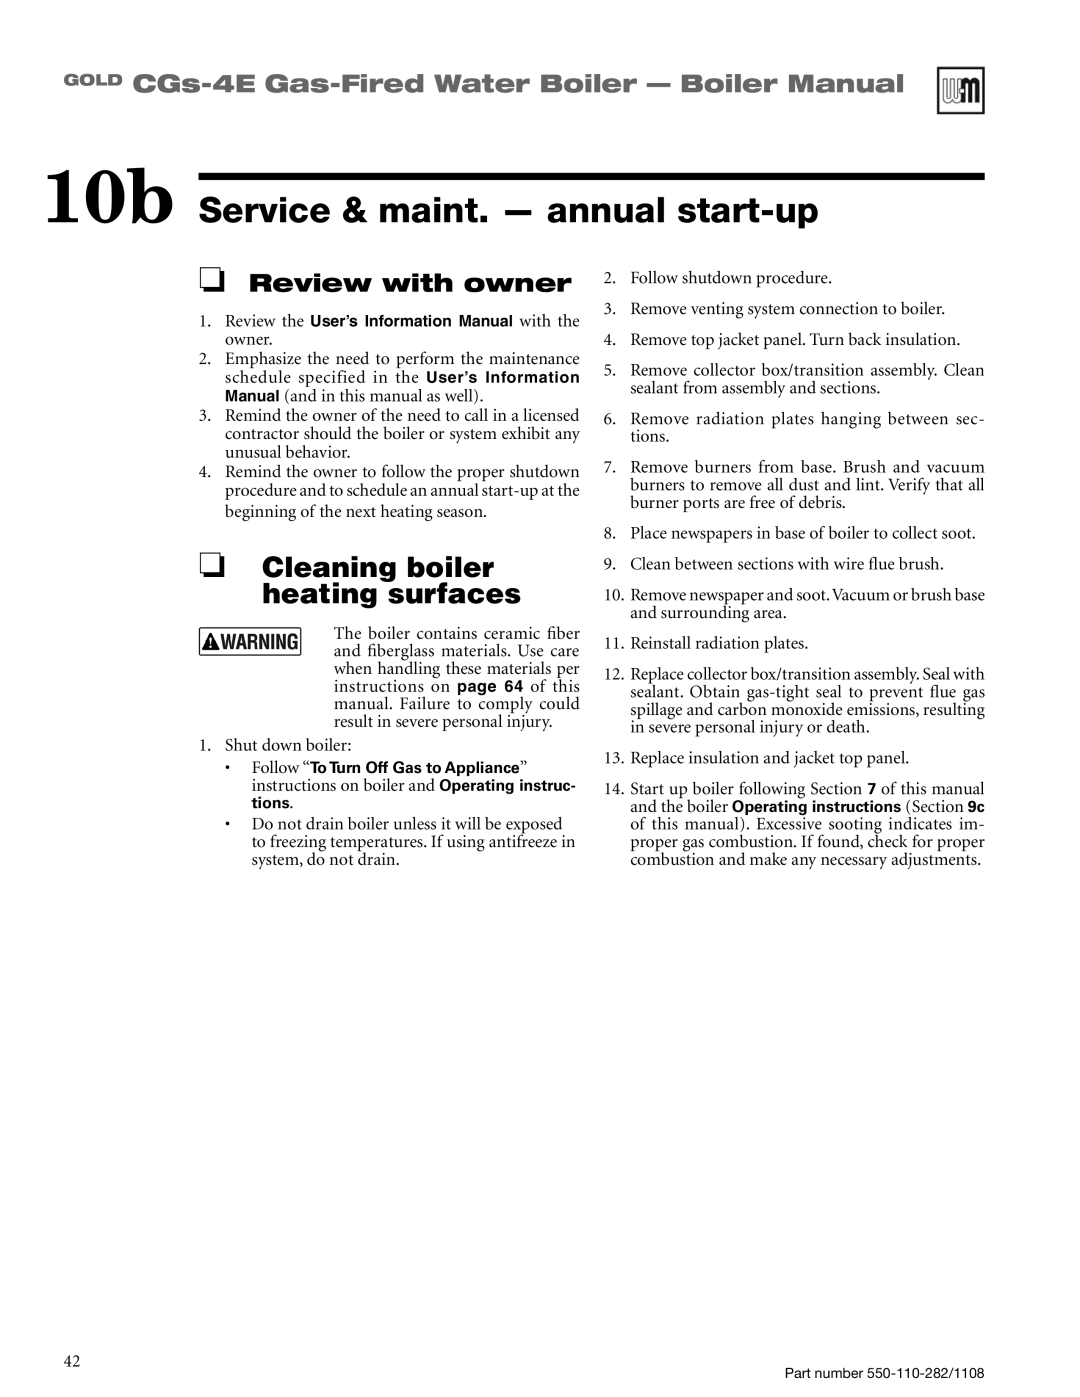 Weil-McLain CGS-4E manual 10b Service & maint. - annual start-up, Cleaning boiler heating surfaces, Review with owner 